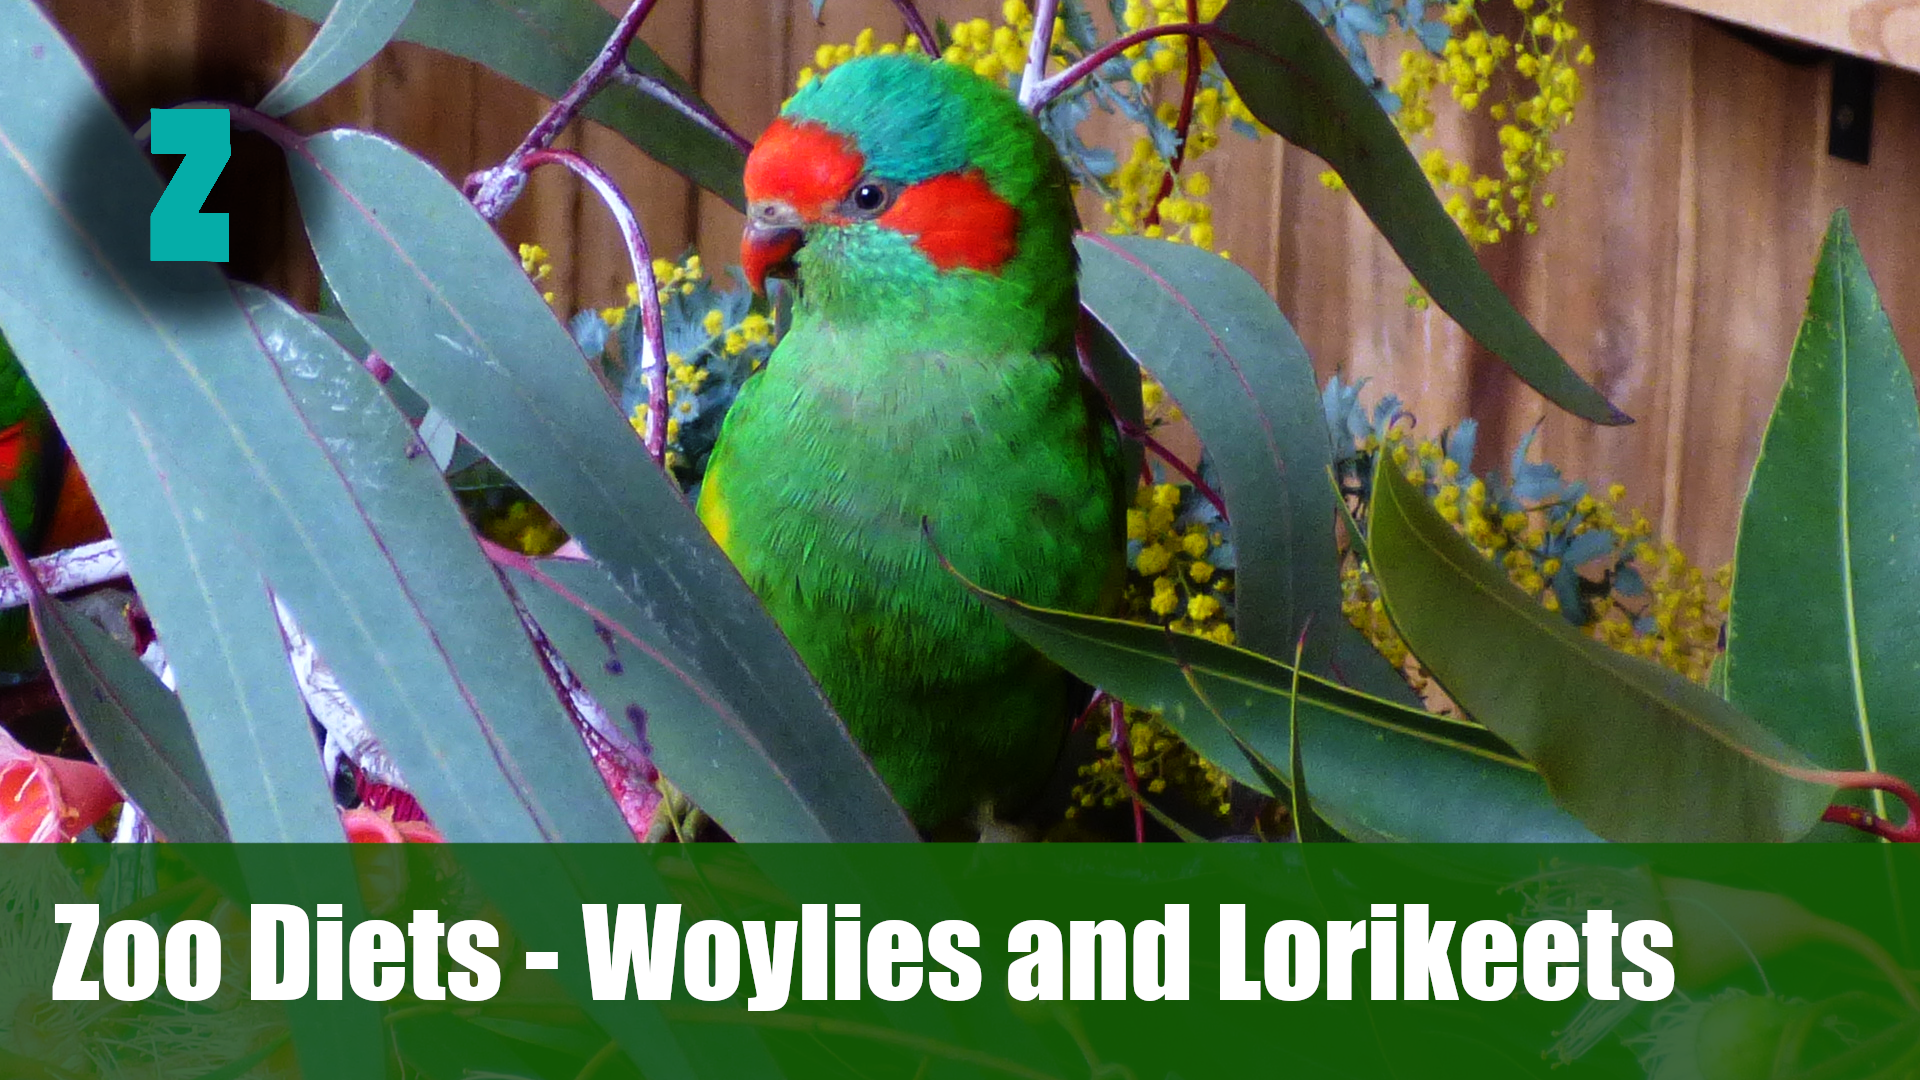 Zoo diets - Brush tail Bettongs and Lorikeets